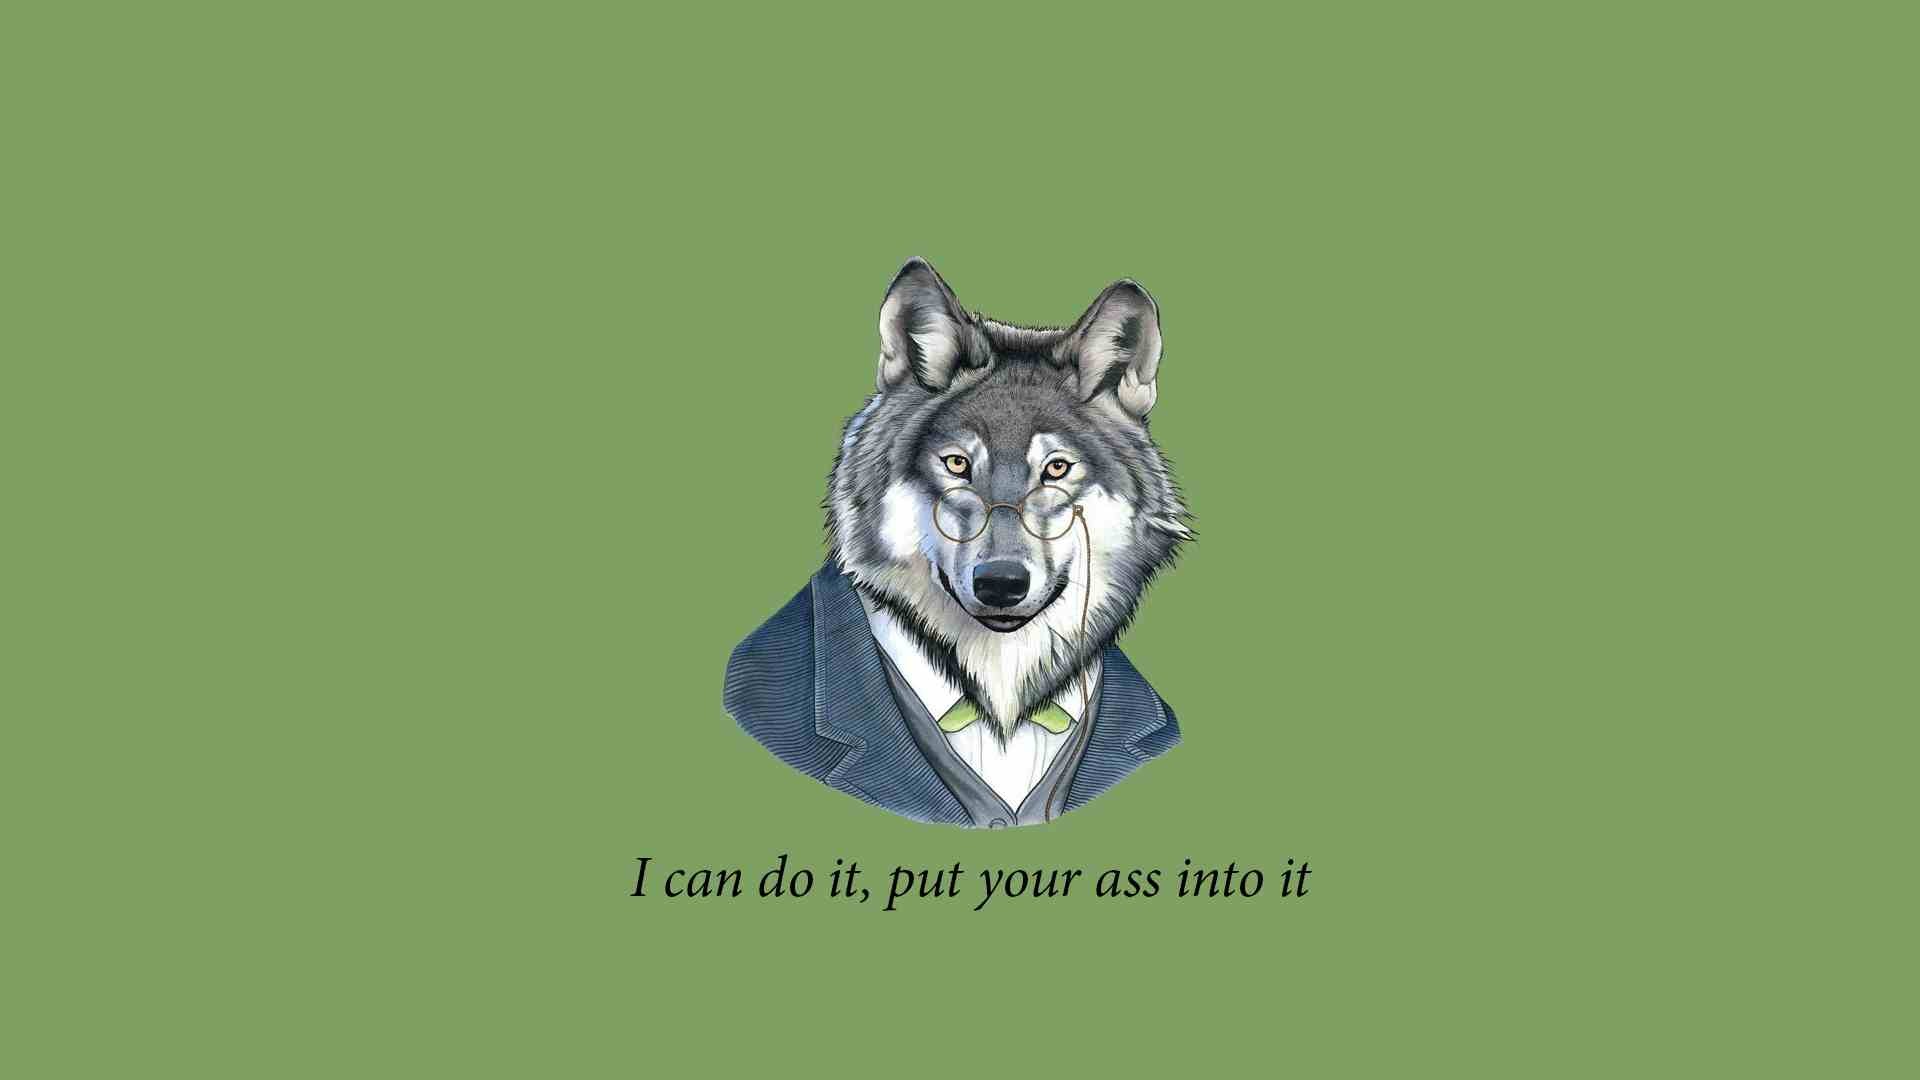 General 1920x1080 quote animals simple background wolf glasses green background typography